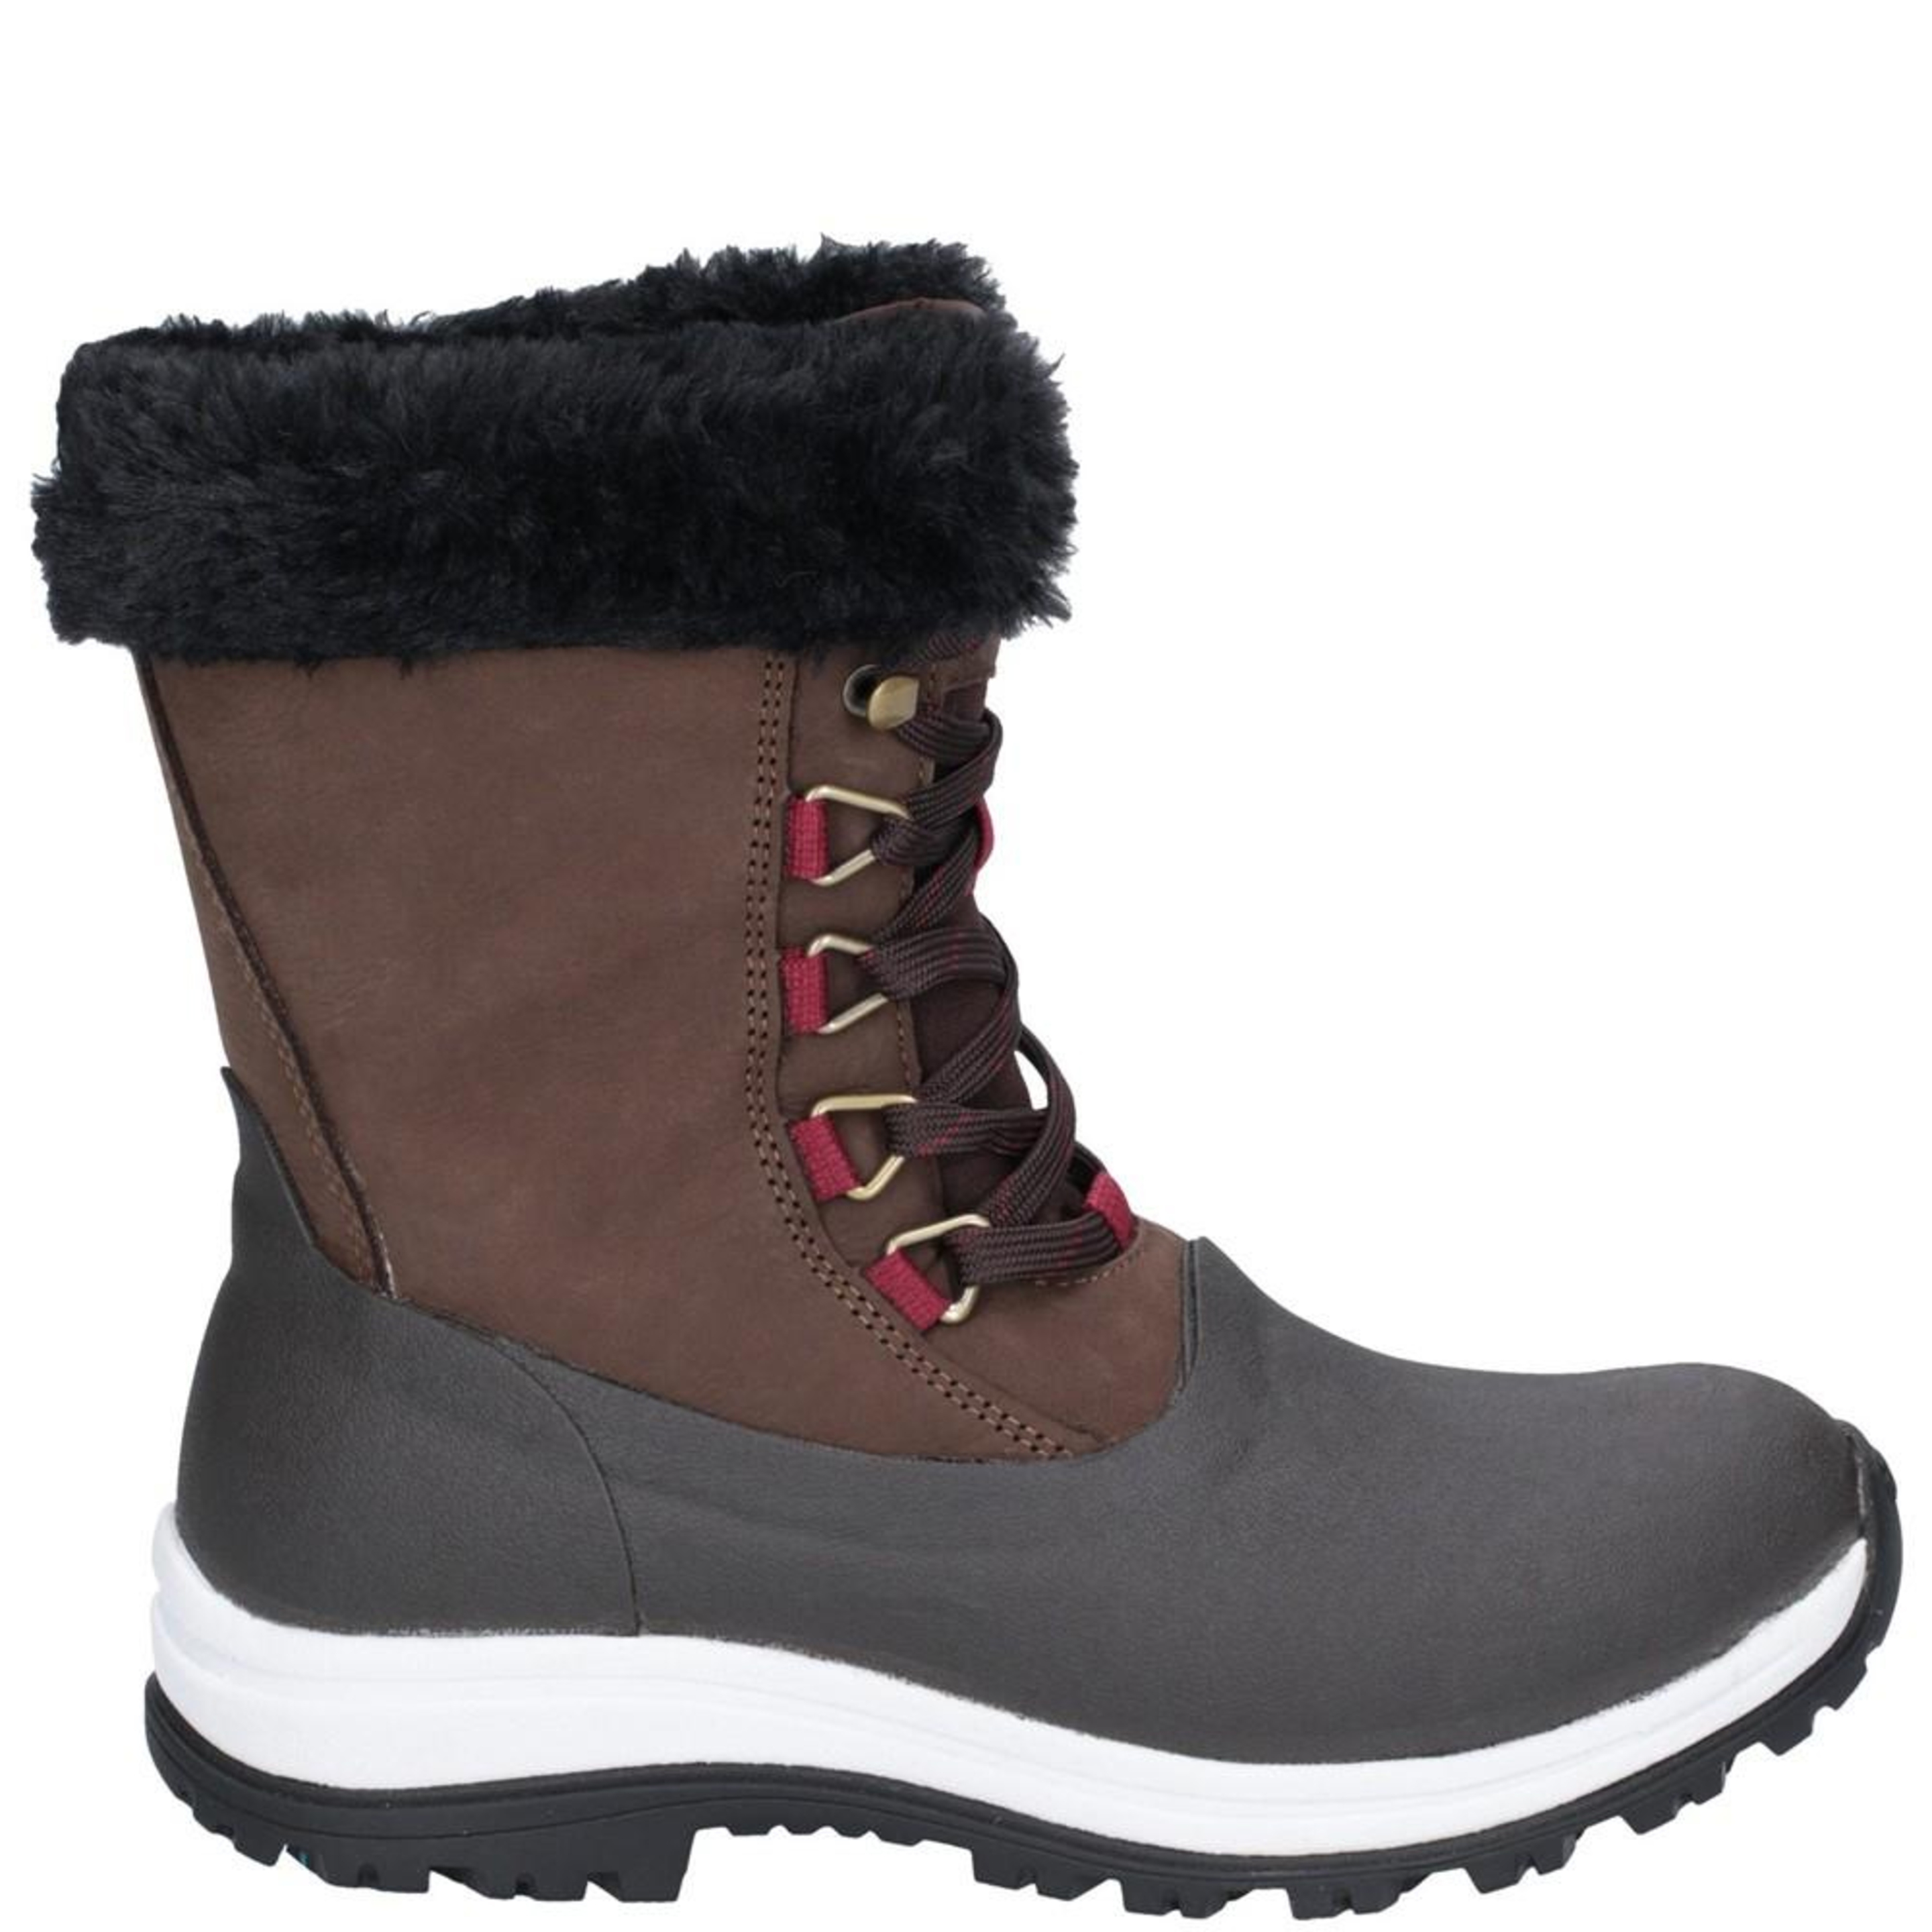 Mulheres/ladies Apres Leather Lace Up Mid Boot Muck Boots (Cinza/vermelho)